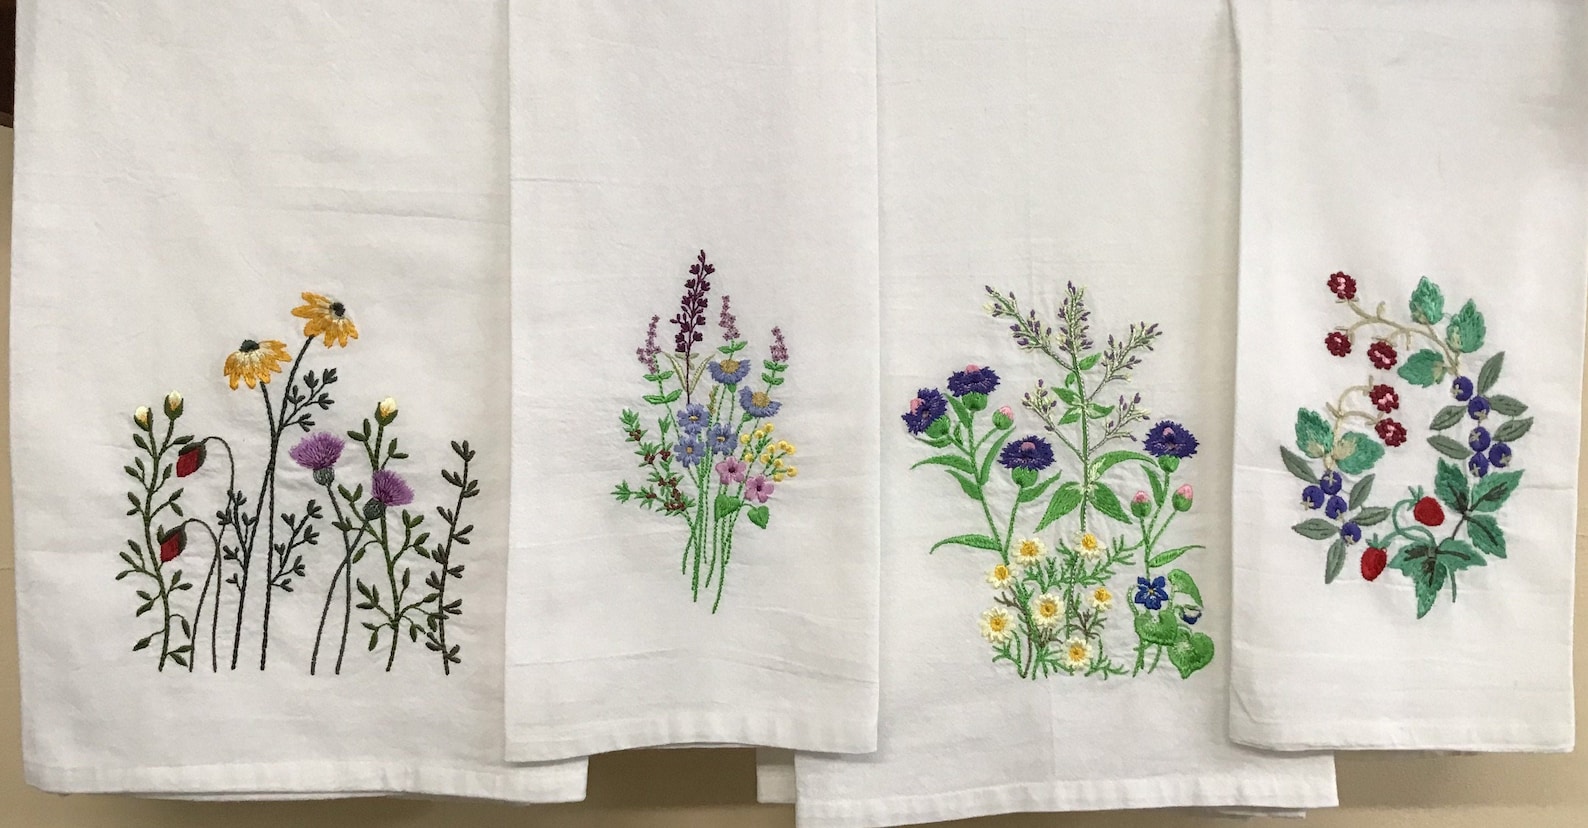 EMBROIDERED TEA TOWELS*Wildflower*Meadow Flowers*Strawberry*Blueberry*Hand Towel*Kitchen Towel*Dish Cloth*Floursack*Bundle Towels/ Discount